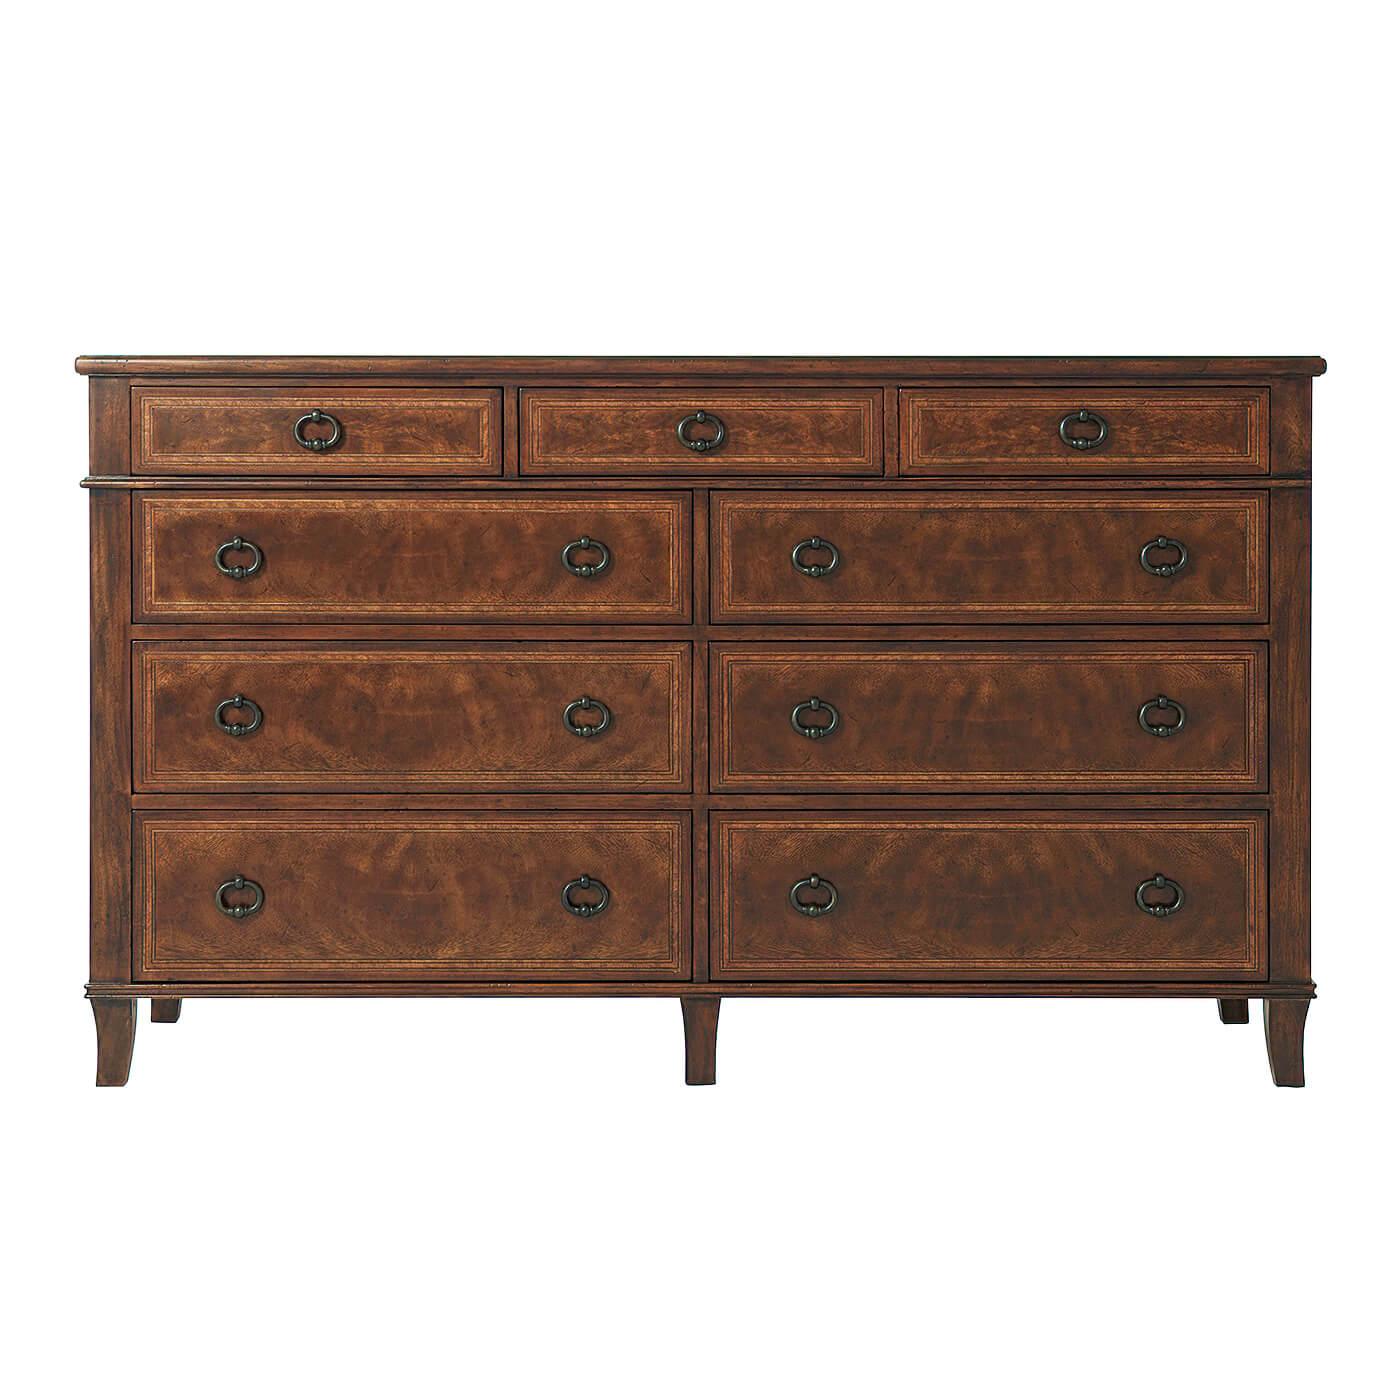 An Italian neoclassic style mahogany dresser, the rectangular cross-banded top above three short frieze drawers and six further long graduated drawers, on splayed legs. 

Dimensions: 60